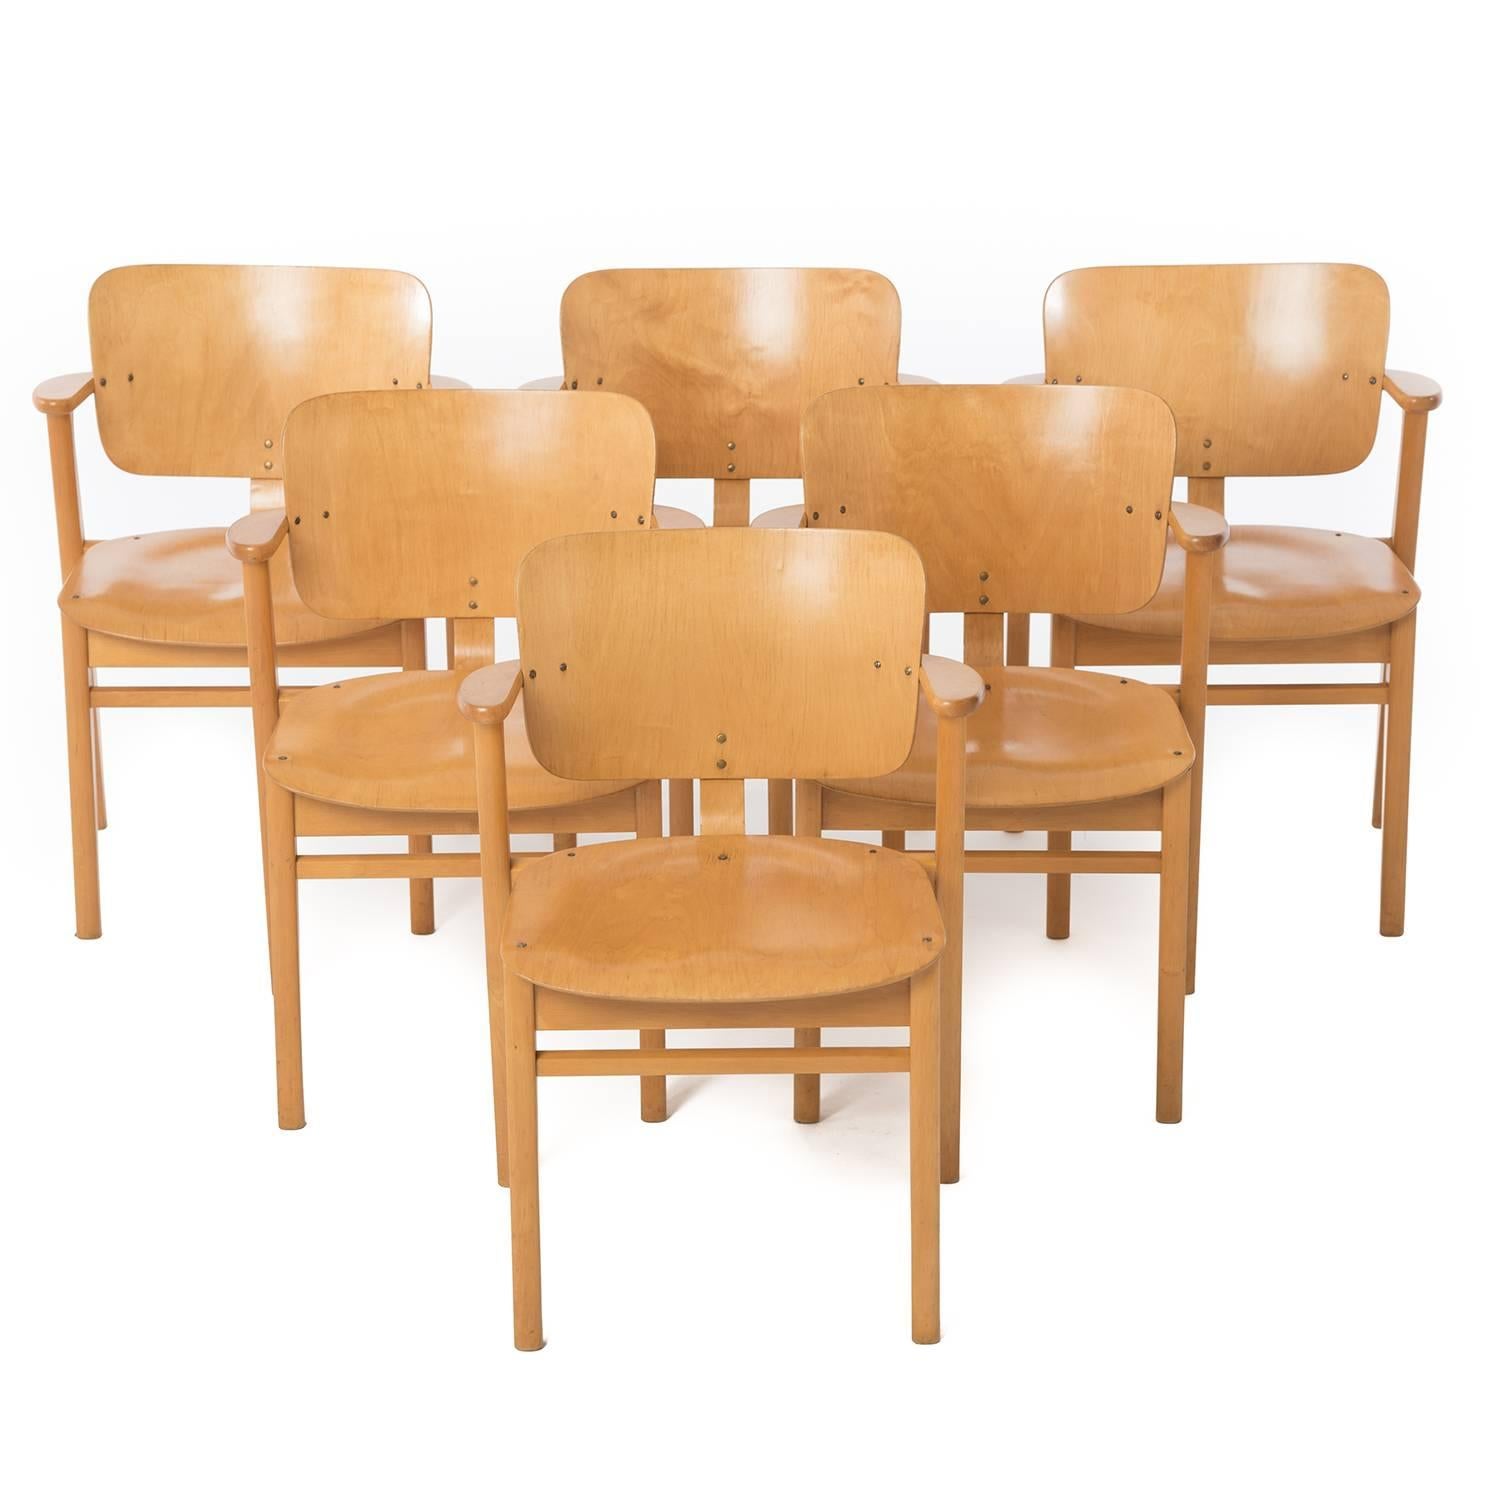 This is an adorable set of stacking chairs. Very practical for smaller living spaces when additional seating is needed. Classic Mid-Century design in vintage birch wood. Condition excellent.

Professional, skilled furniture restoration is an